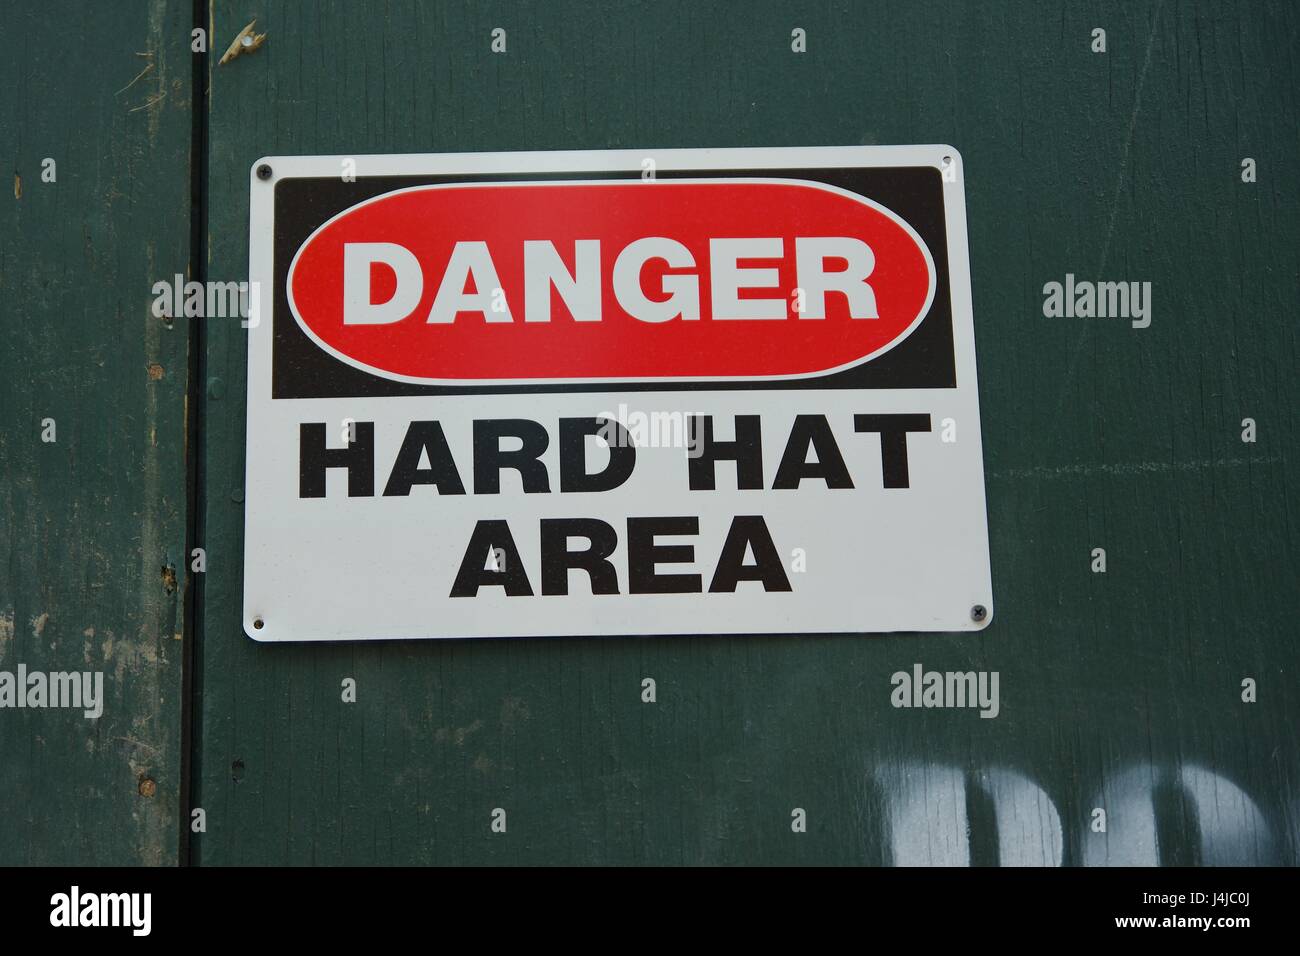 danger hard hat area sign hanging on construction green wall in urban city Stock Photo